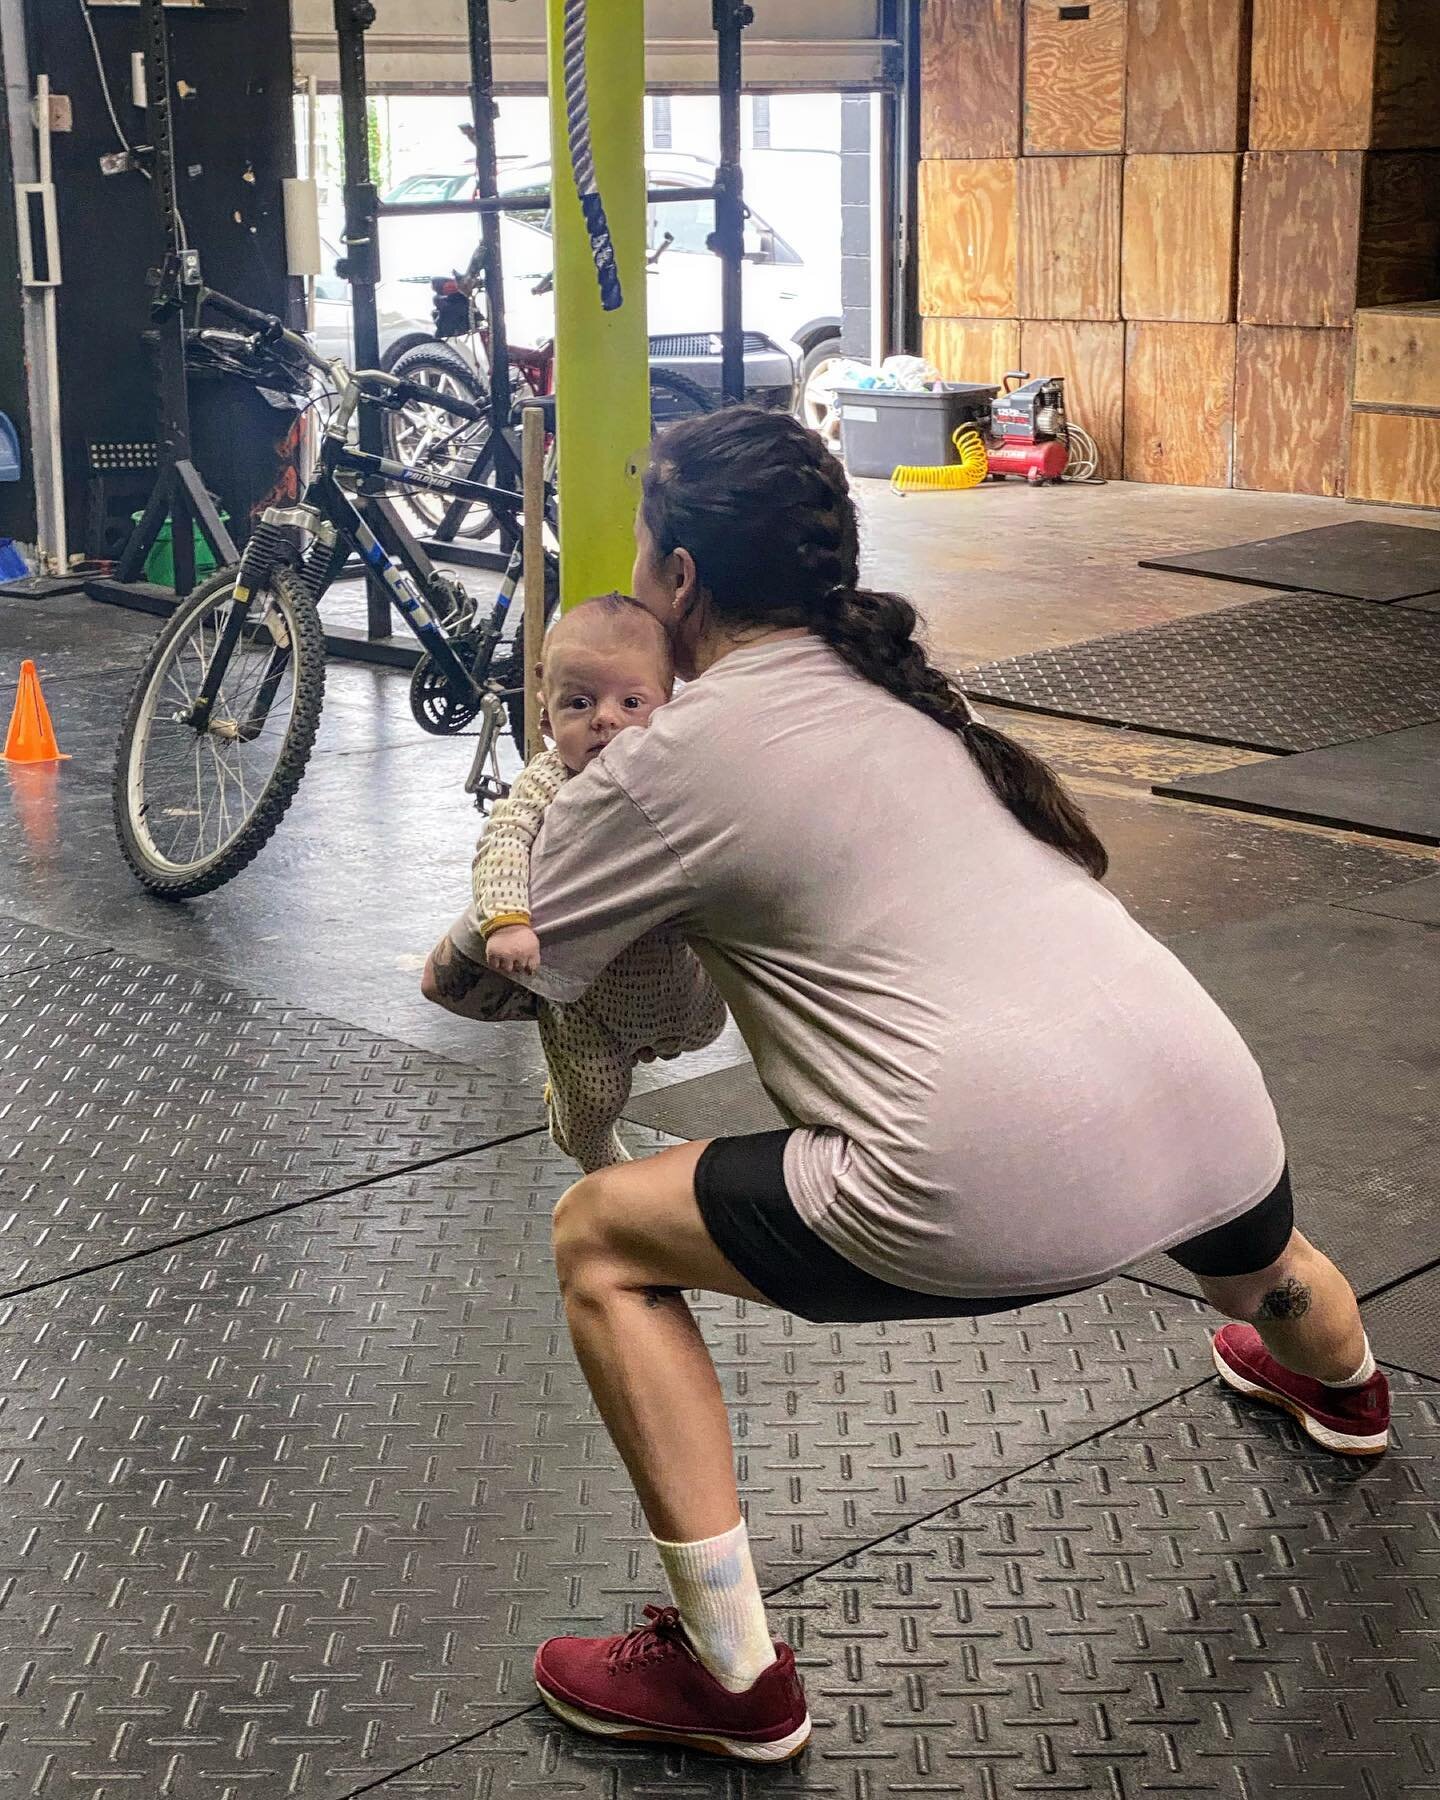 Weighted Cossack Squats at Open Gym 👶🏻 🍑 
📦 246 Park ST
📱 740-525-5967
💻 crossfitincognito@gmail.com